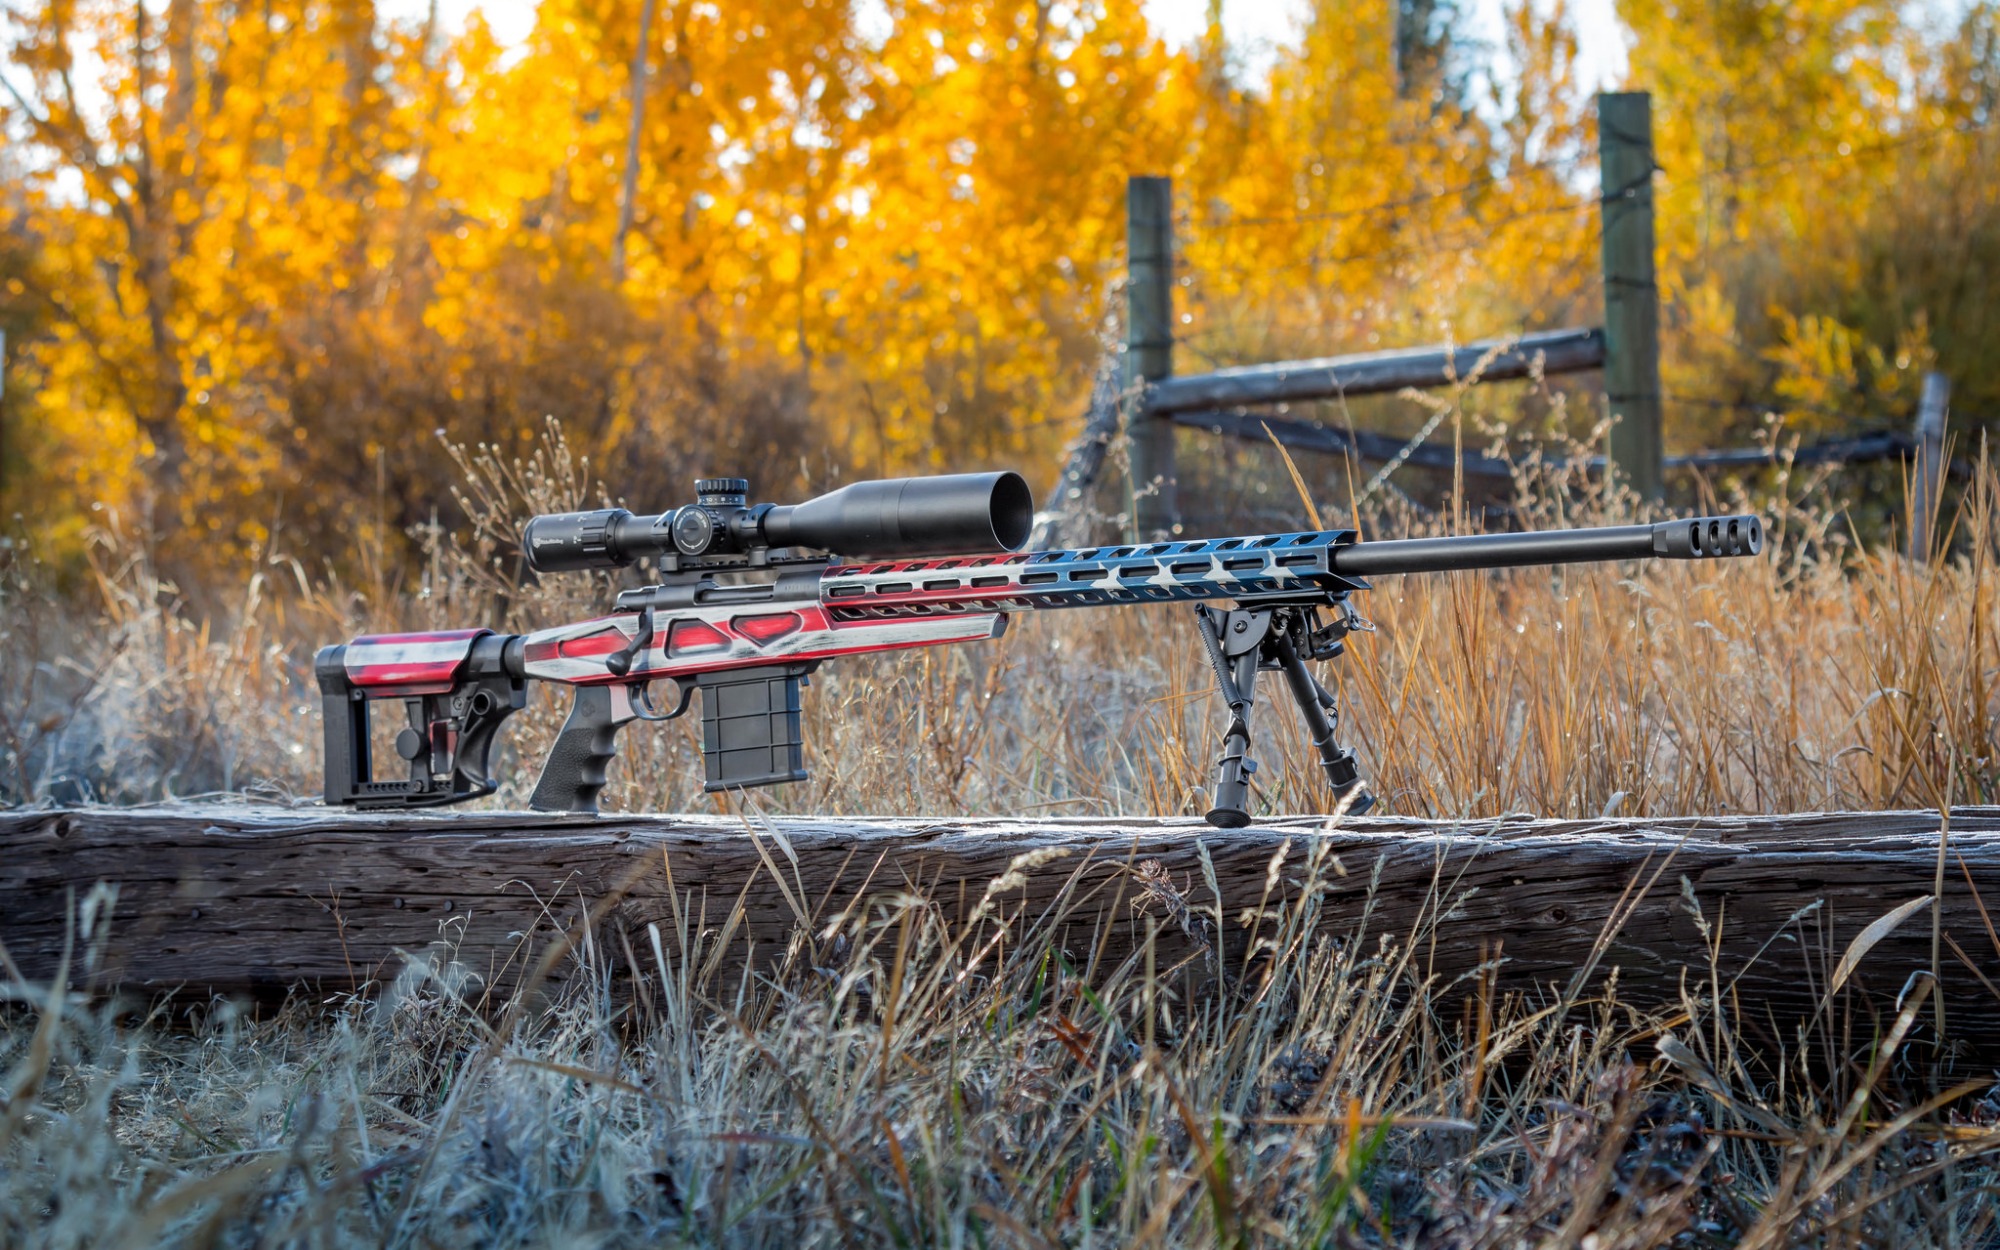 The Howa 1500 Bolt Action Rifle Is Well Worth Its Price The National Interest